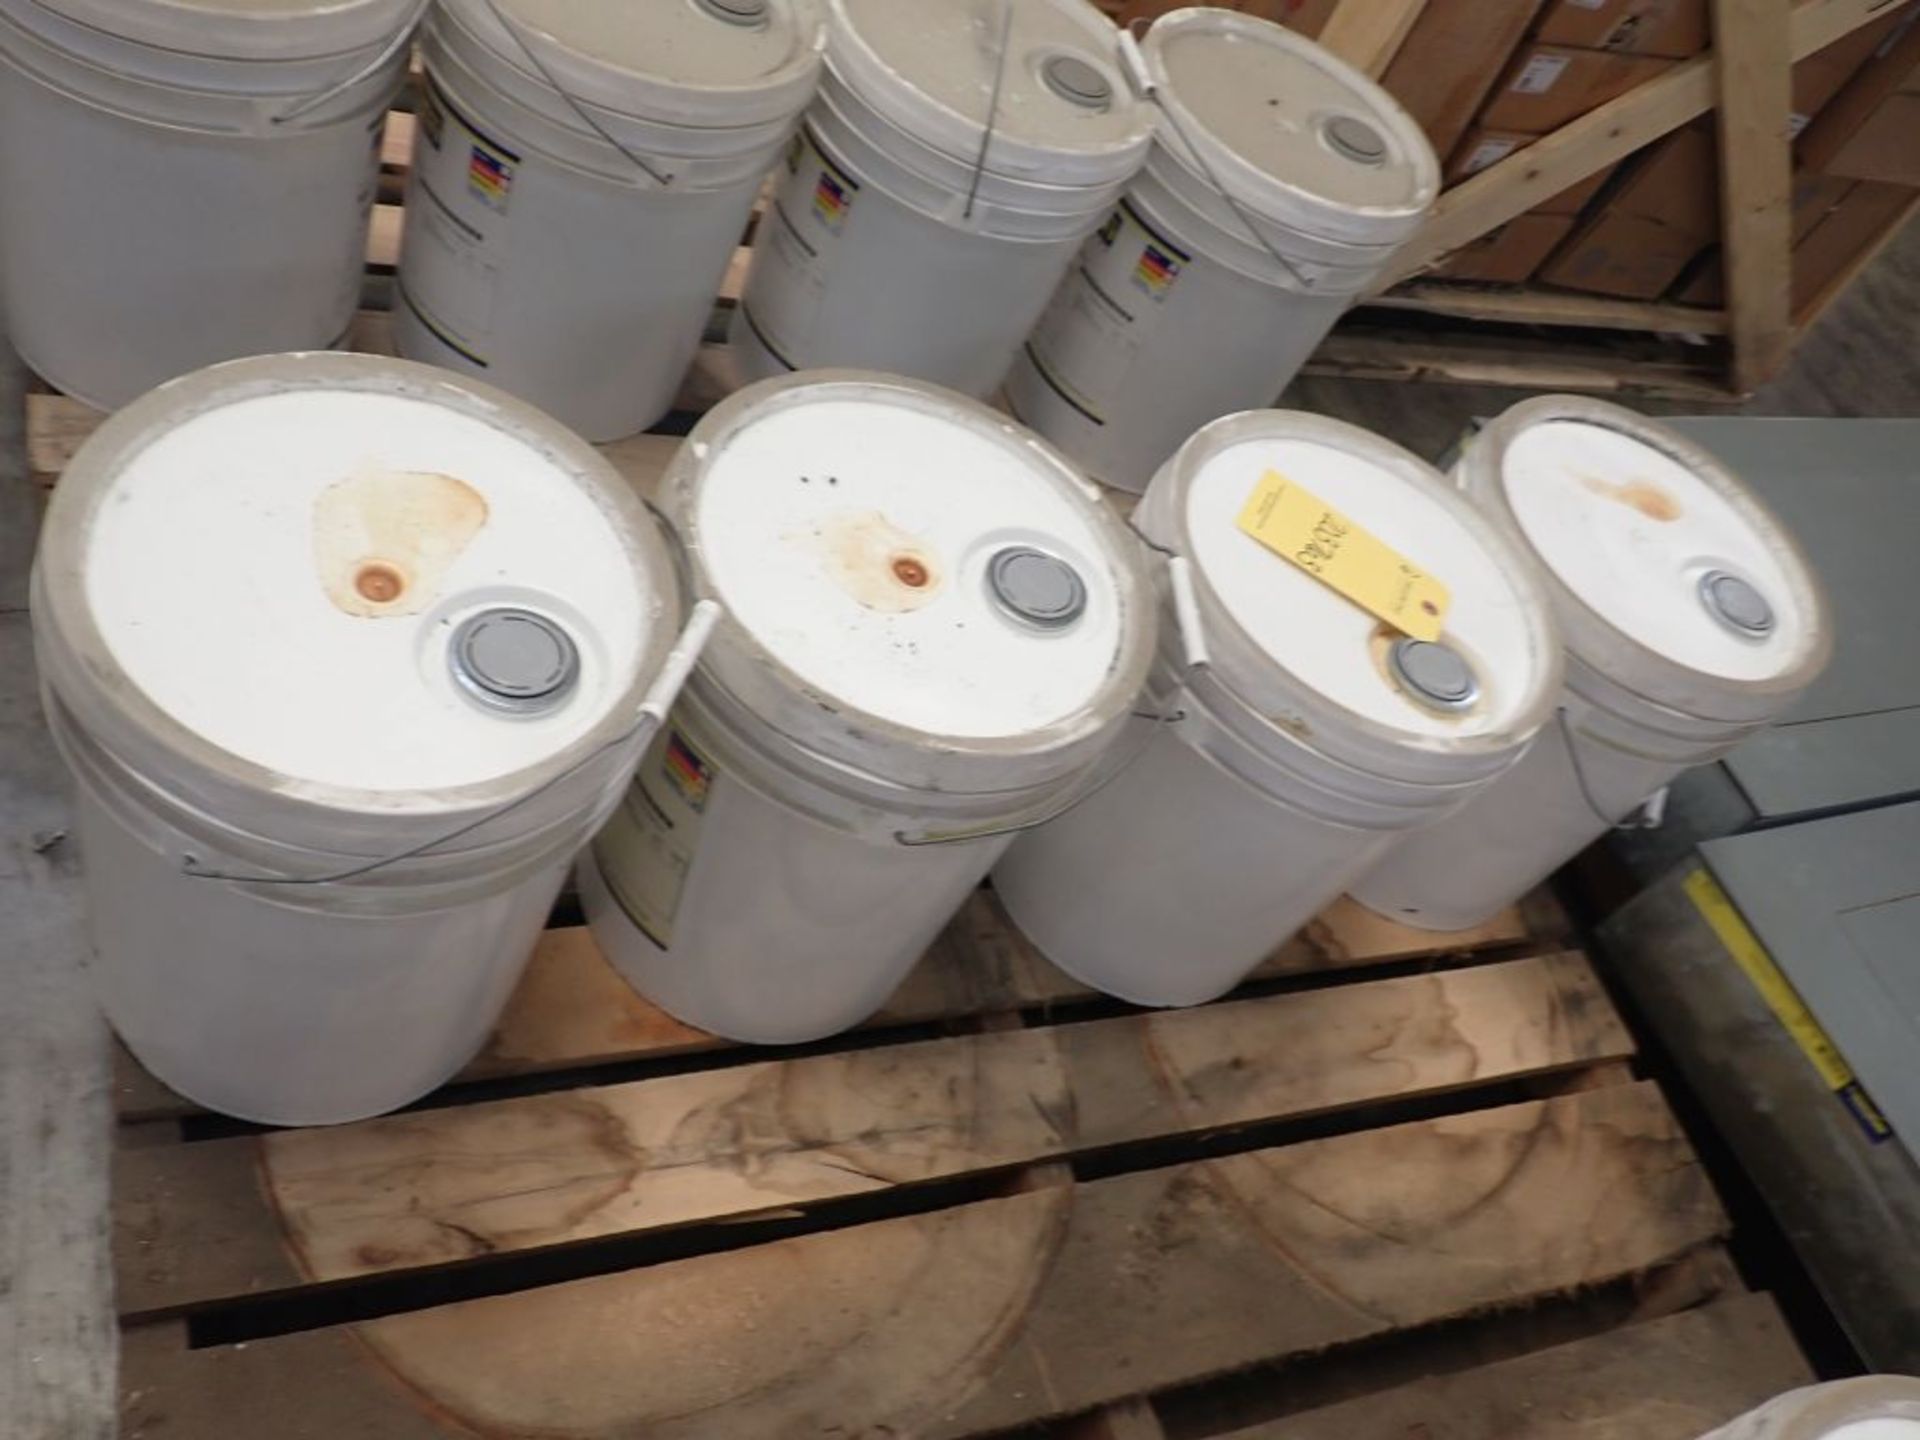 Lot of (4) Containers of 5-Gallon Condat Wire Lubricant | Item Key: 041-0191-70; New Surplus